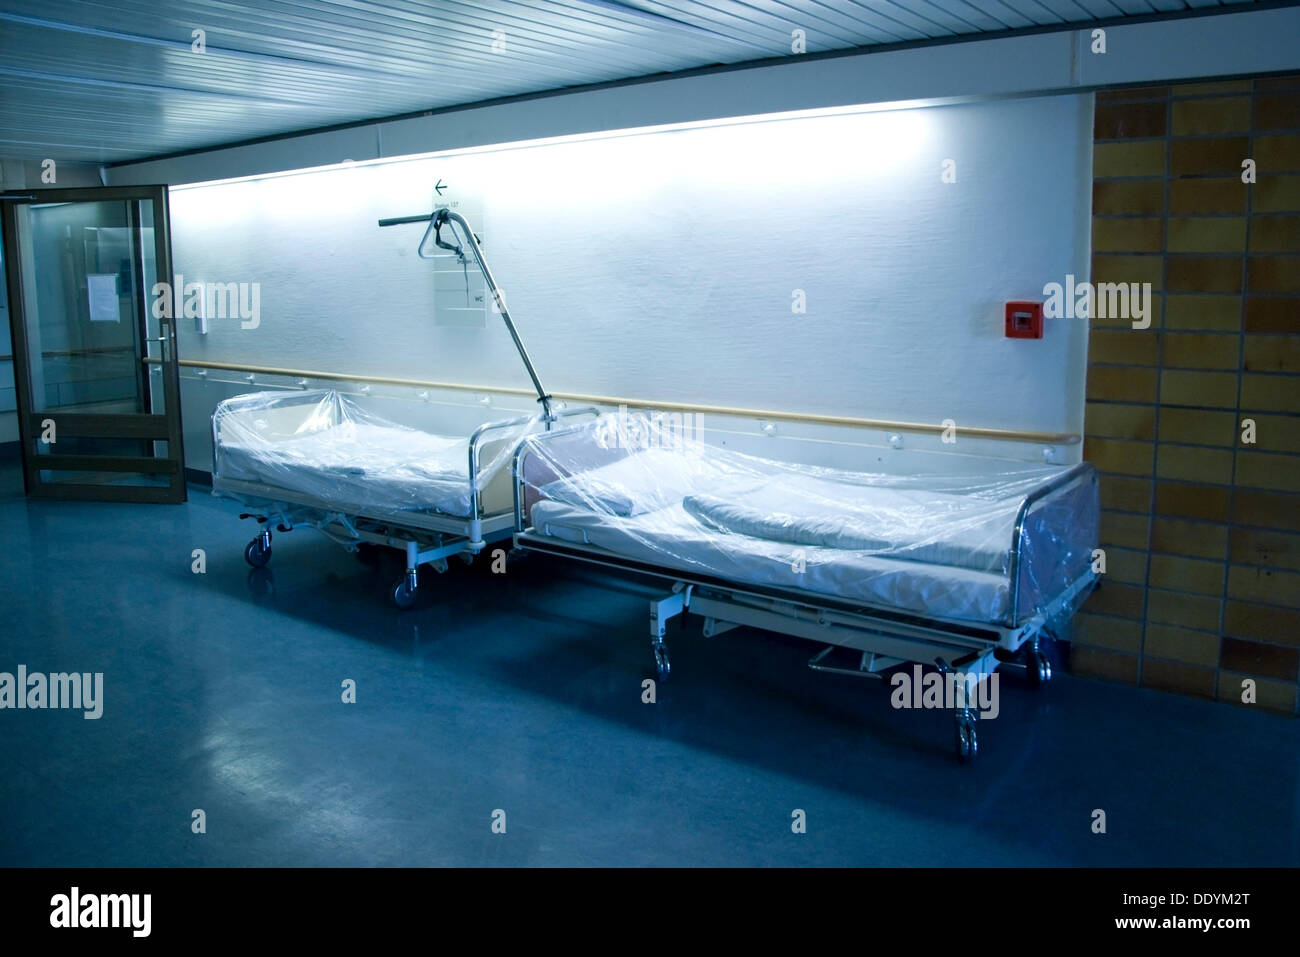 Hospital bed in the hospital, Berlin Stock Photo